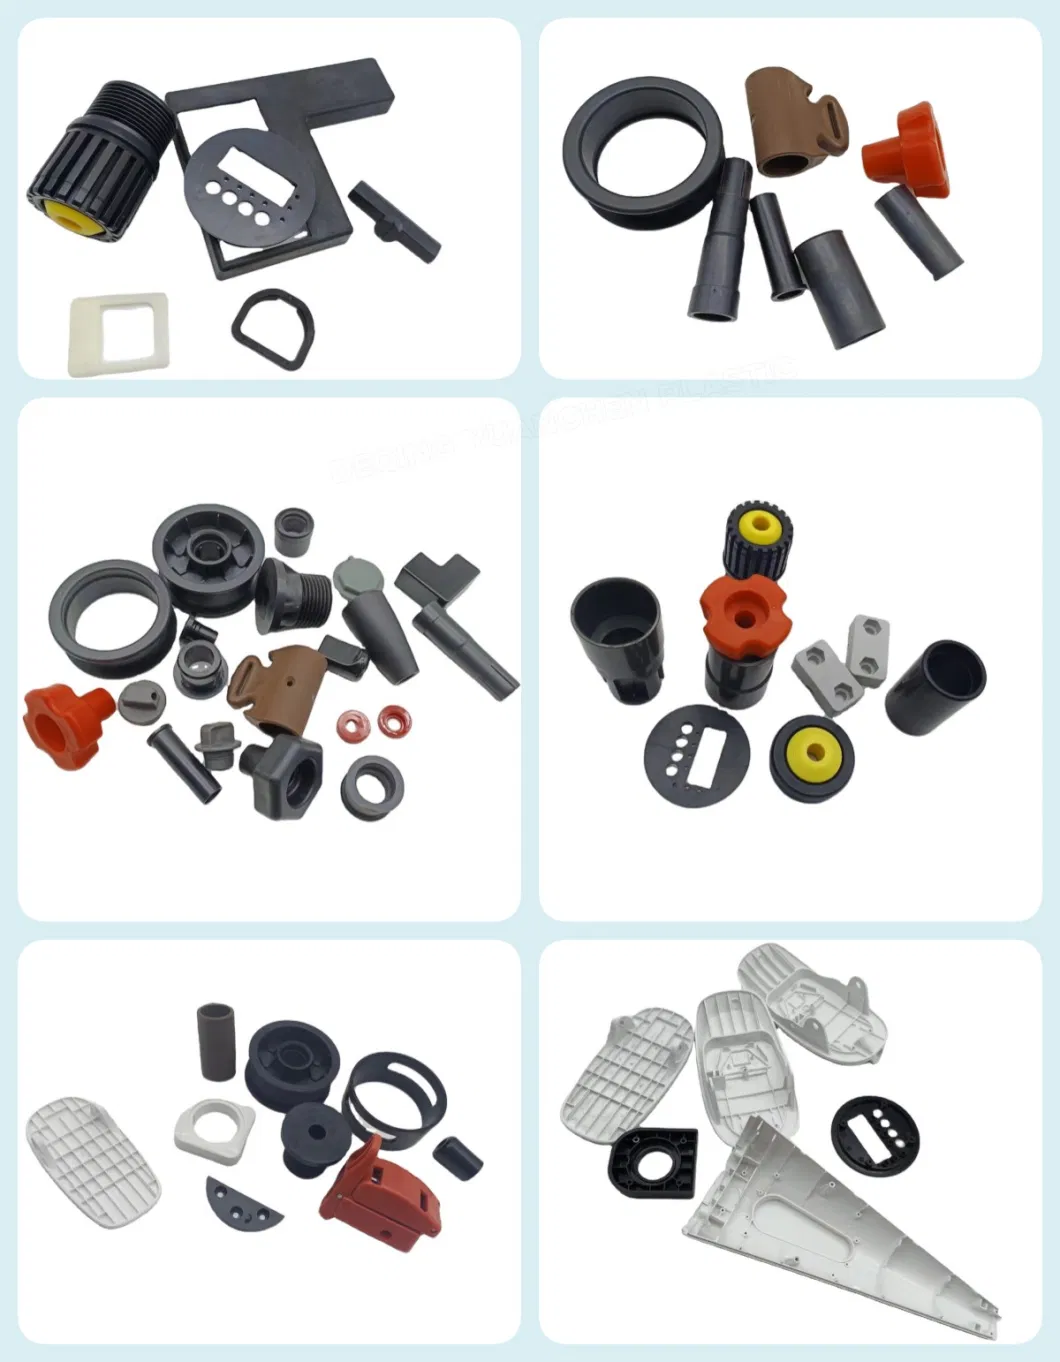 Best Selling Plastic Injection Molded Parts Electronic Plastic Spare Parts